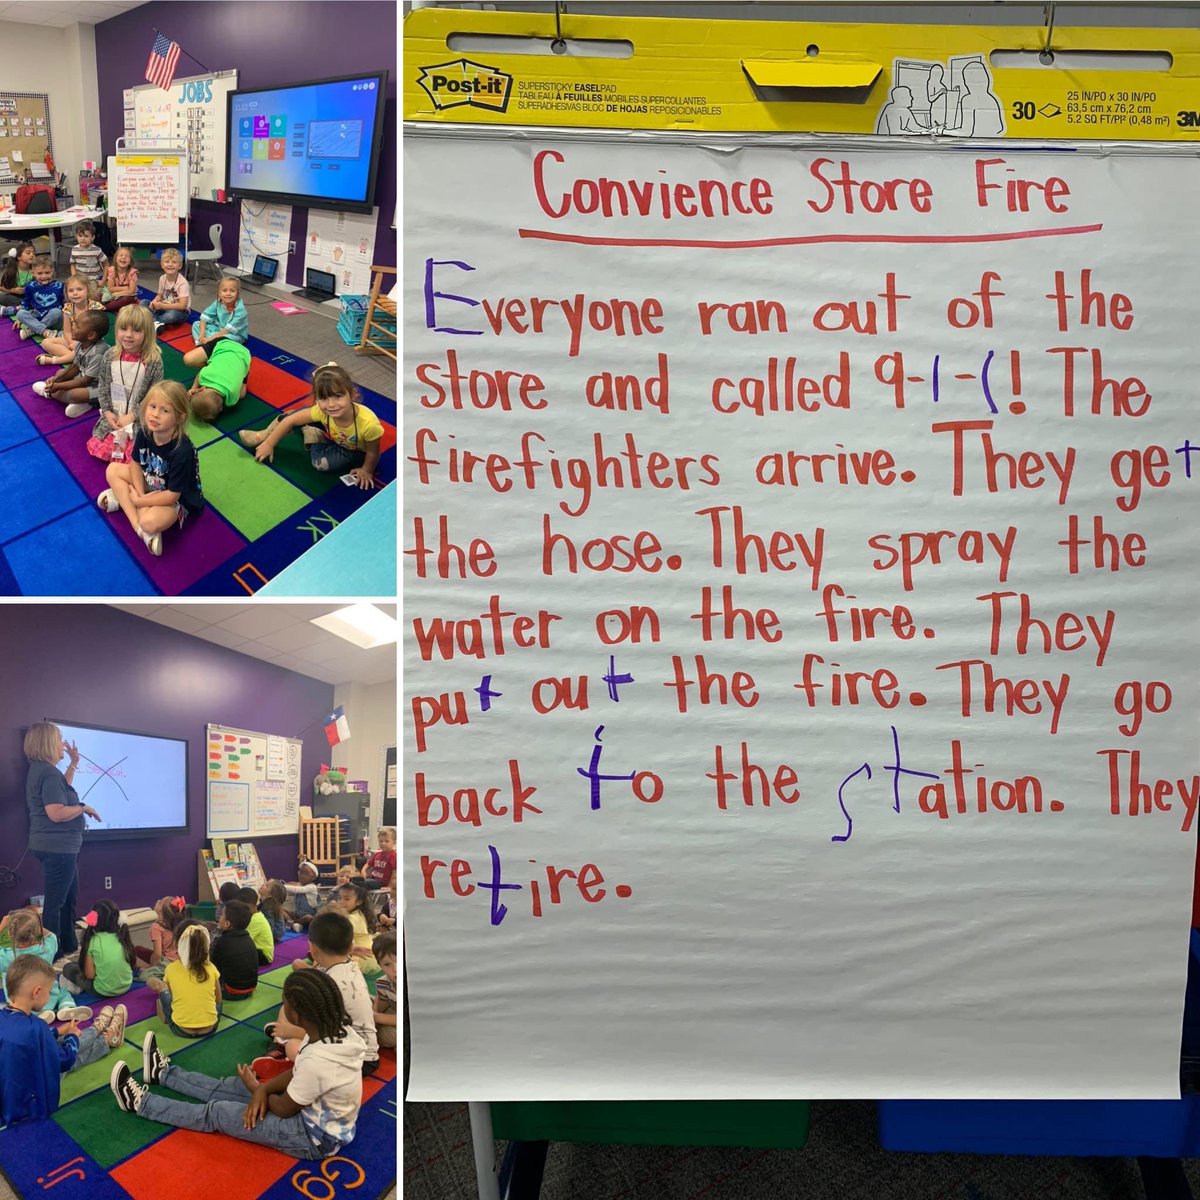 Mrs. Hatton’s PK class has been learning about what makes a good sentence. To help show them that good sentences have spaces between words, start with capital letters, & have punctuation at the end, the kids shared the pen during writing as they made up a story about a fire!✏️